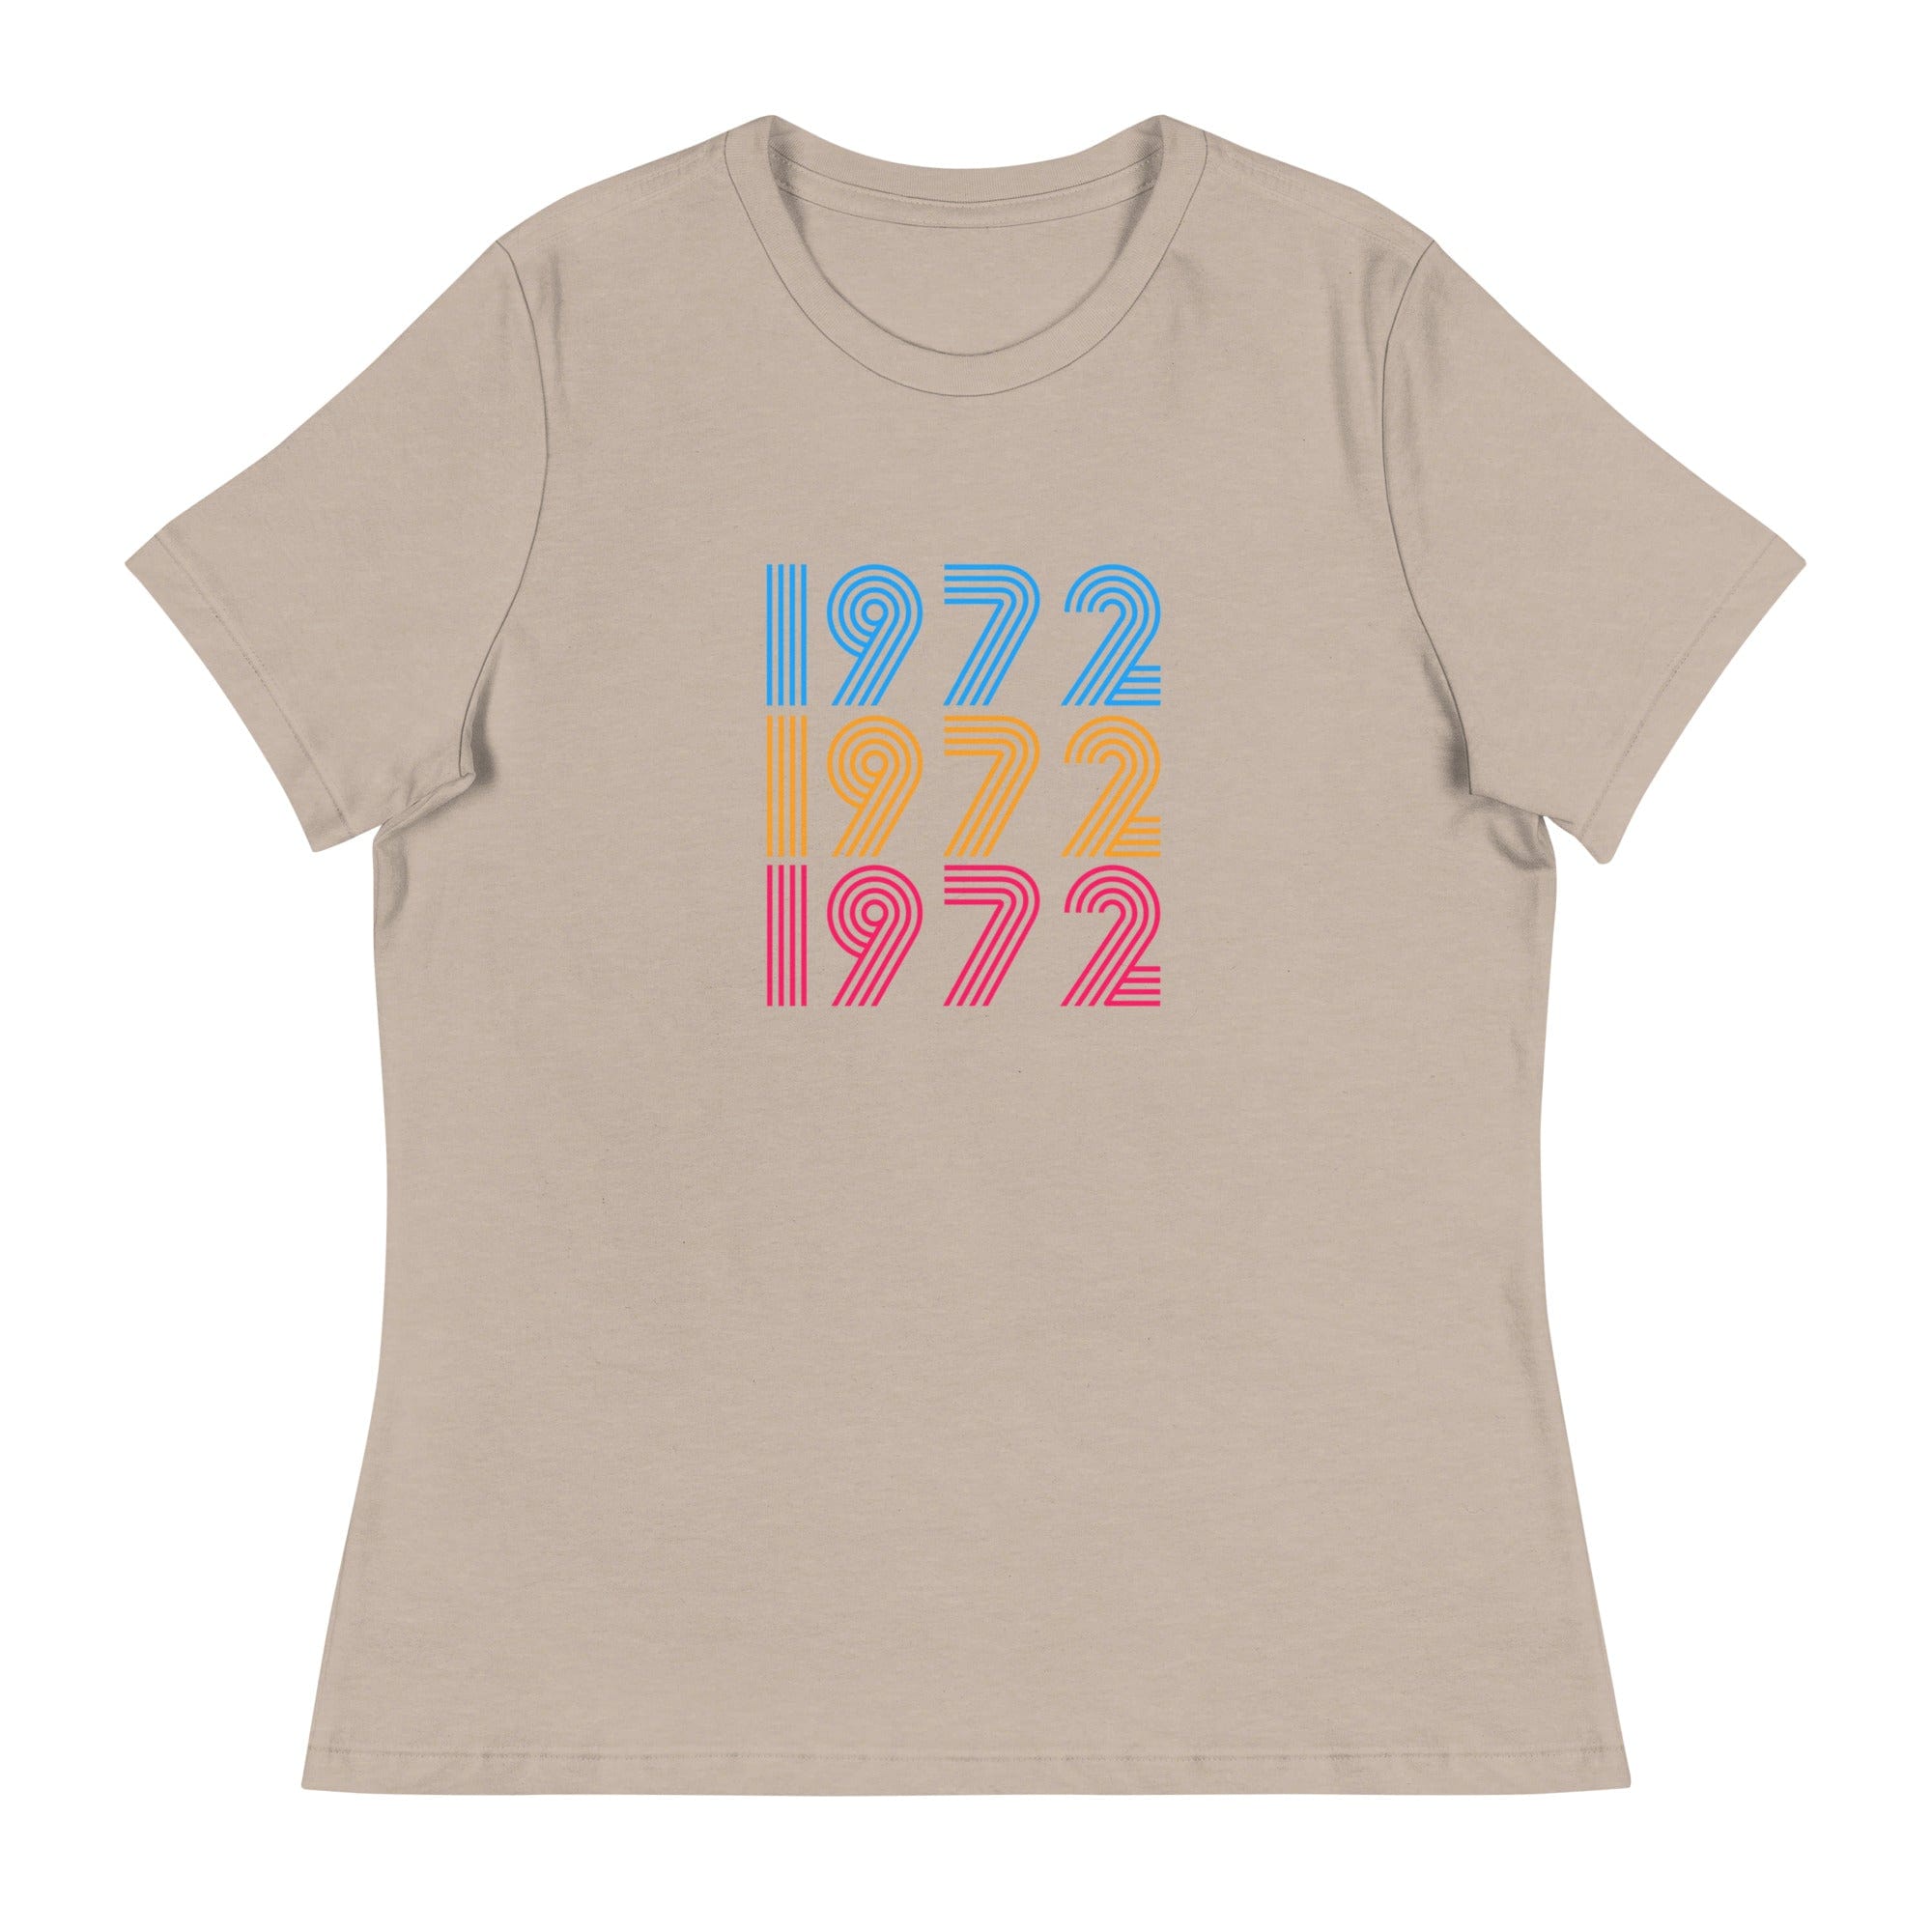 Spruced Roost Women's Clothing Heather Stone / S Vintage 1972 50th Birthday Shirt - Celebrate - Happy Birthday -  S-3X